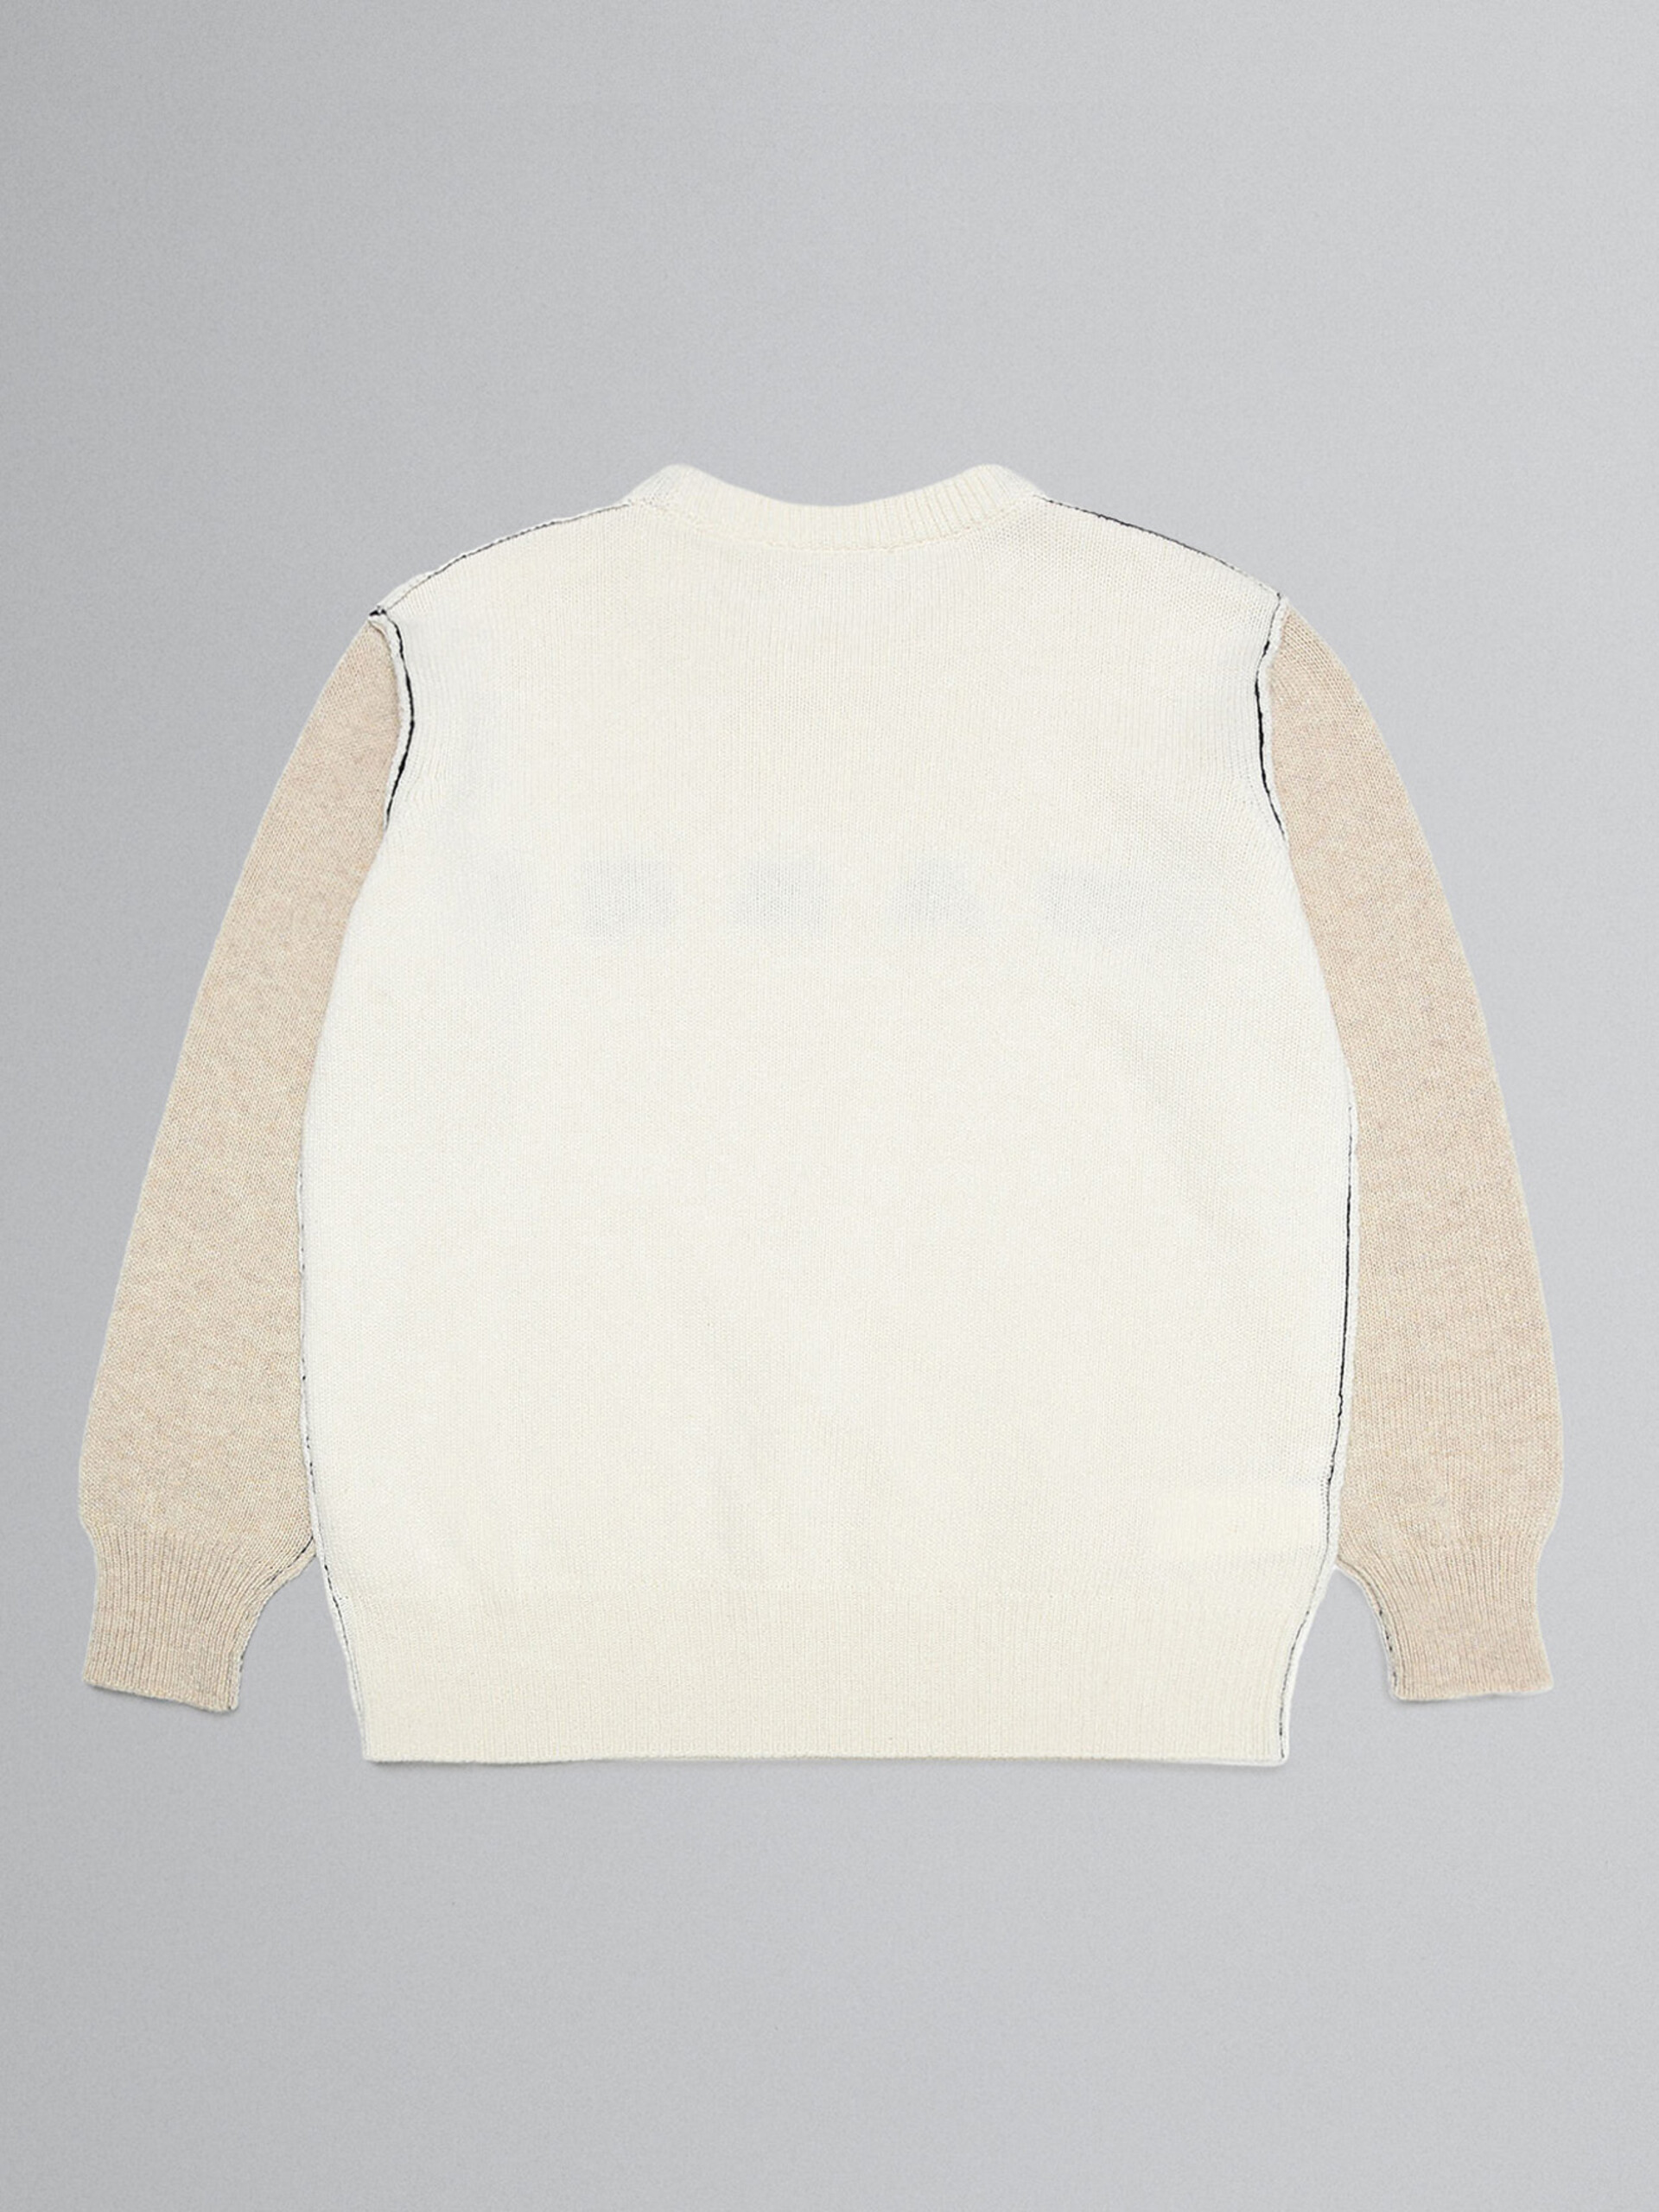 Milky white knitted sweater with "Marni" intarsia - Knitwear - Image 2